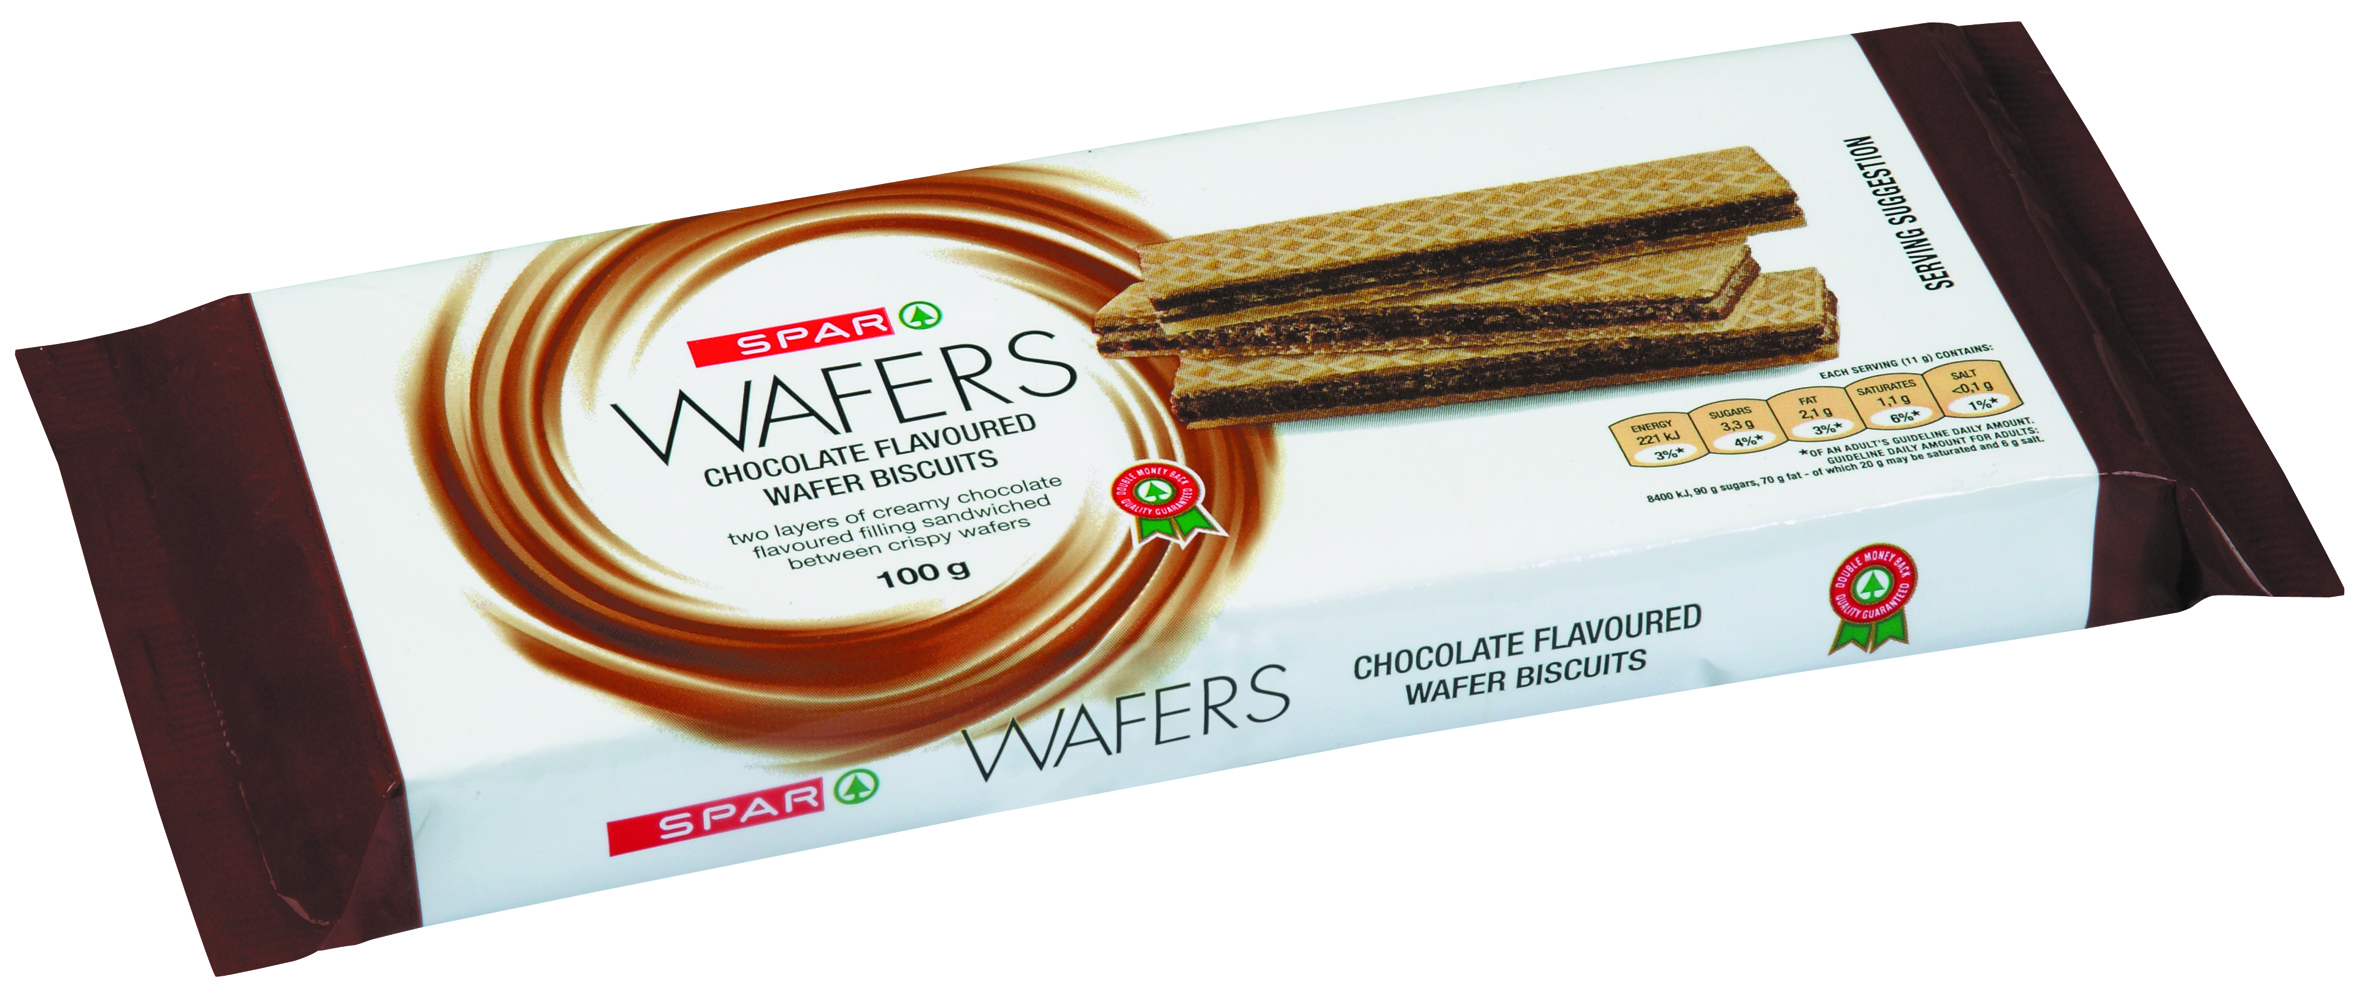 wafer biscuits - chocolate flavoured